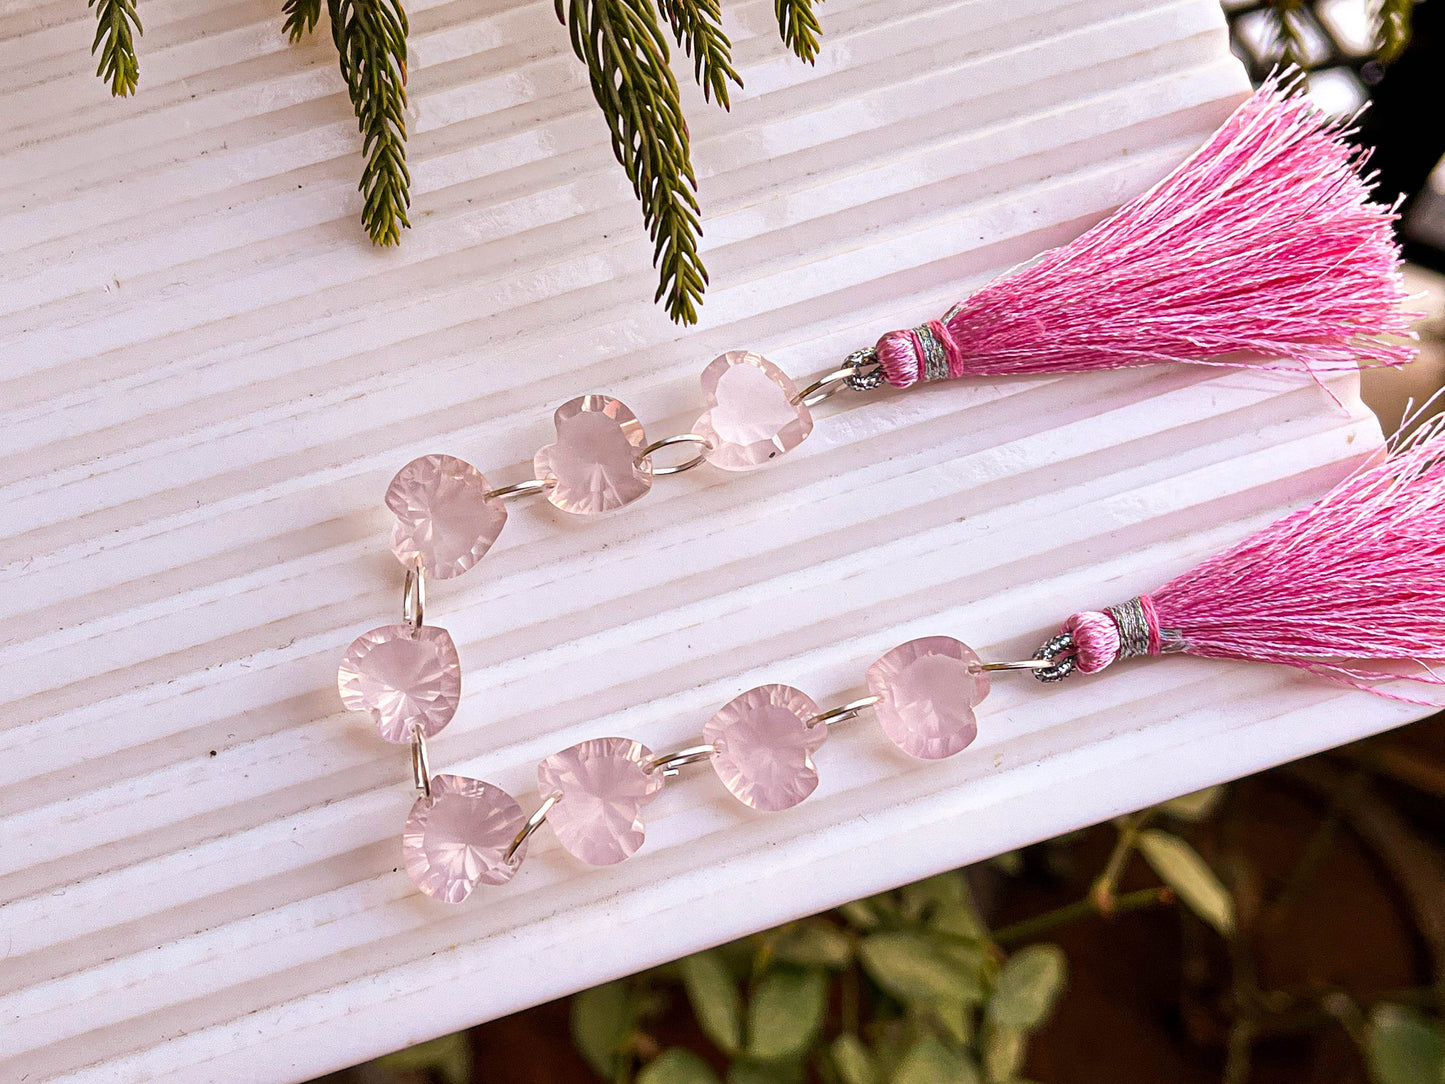 Rose Quartz, Heart Shape Concave Cut Double Drill Beads, 12x13mm, 6 inch, 8 Pieces String, Beadsforyourjewellery